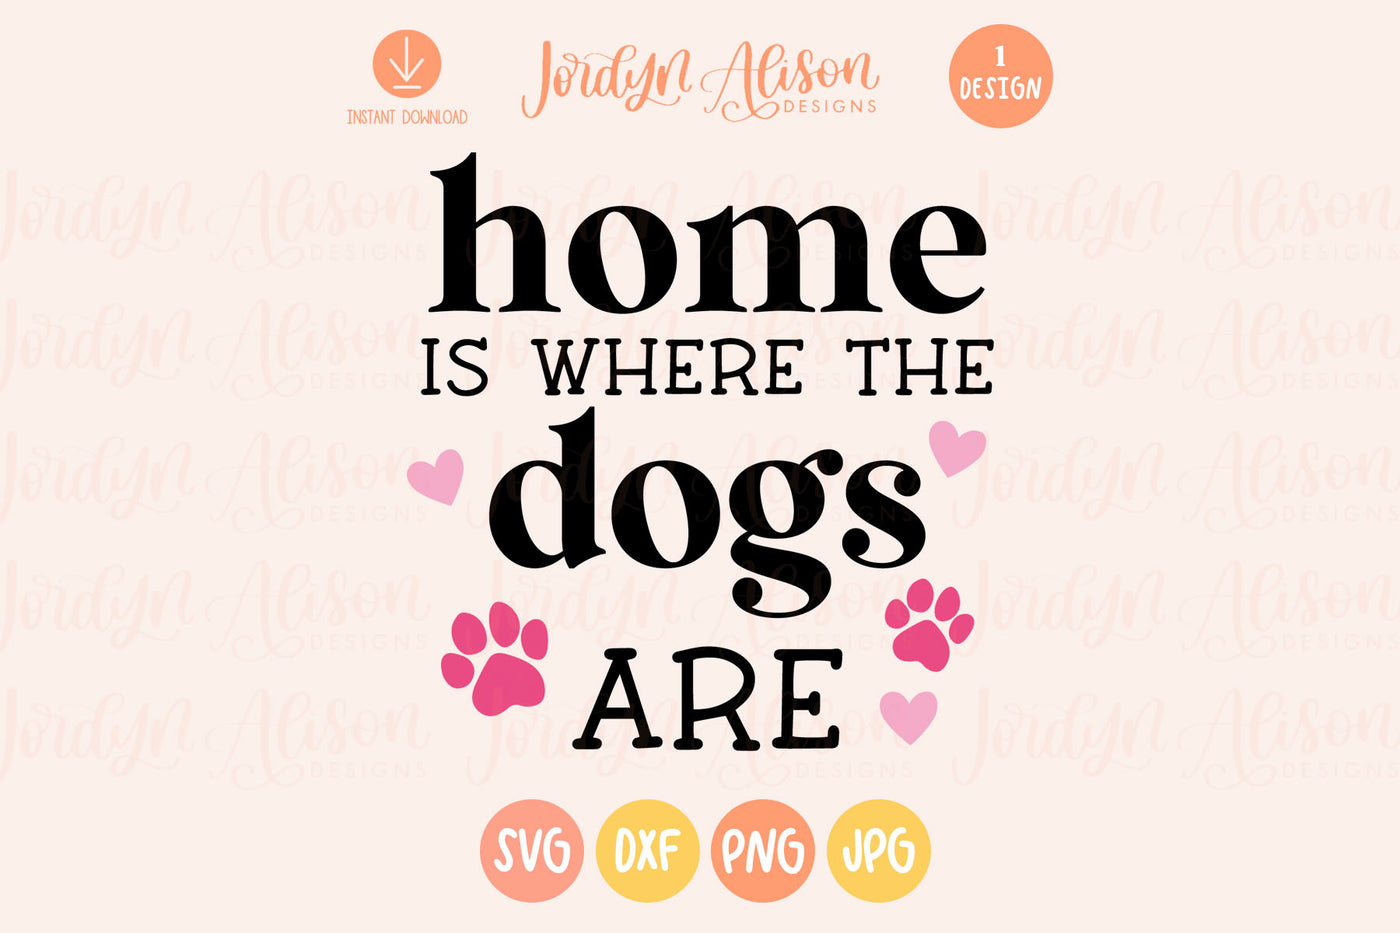 Home is Where the Dogs Are SVG